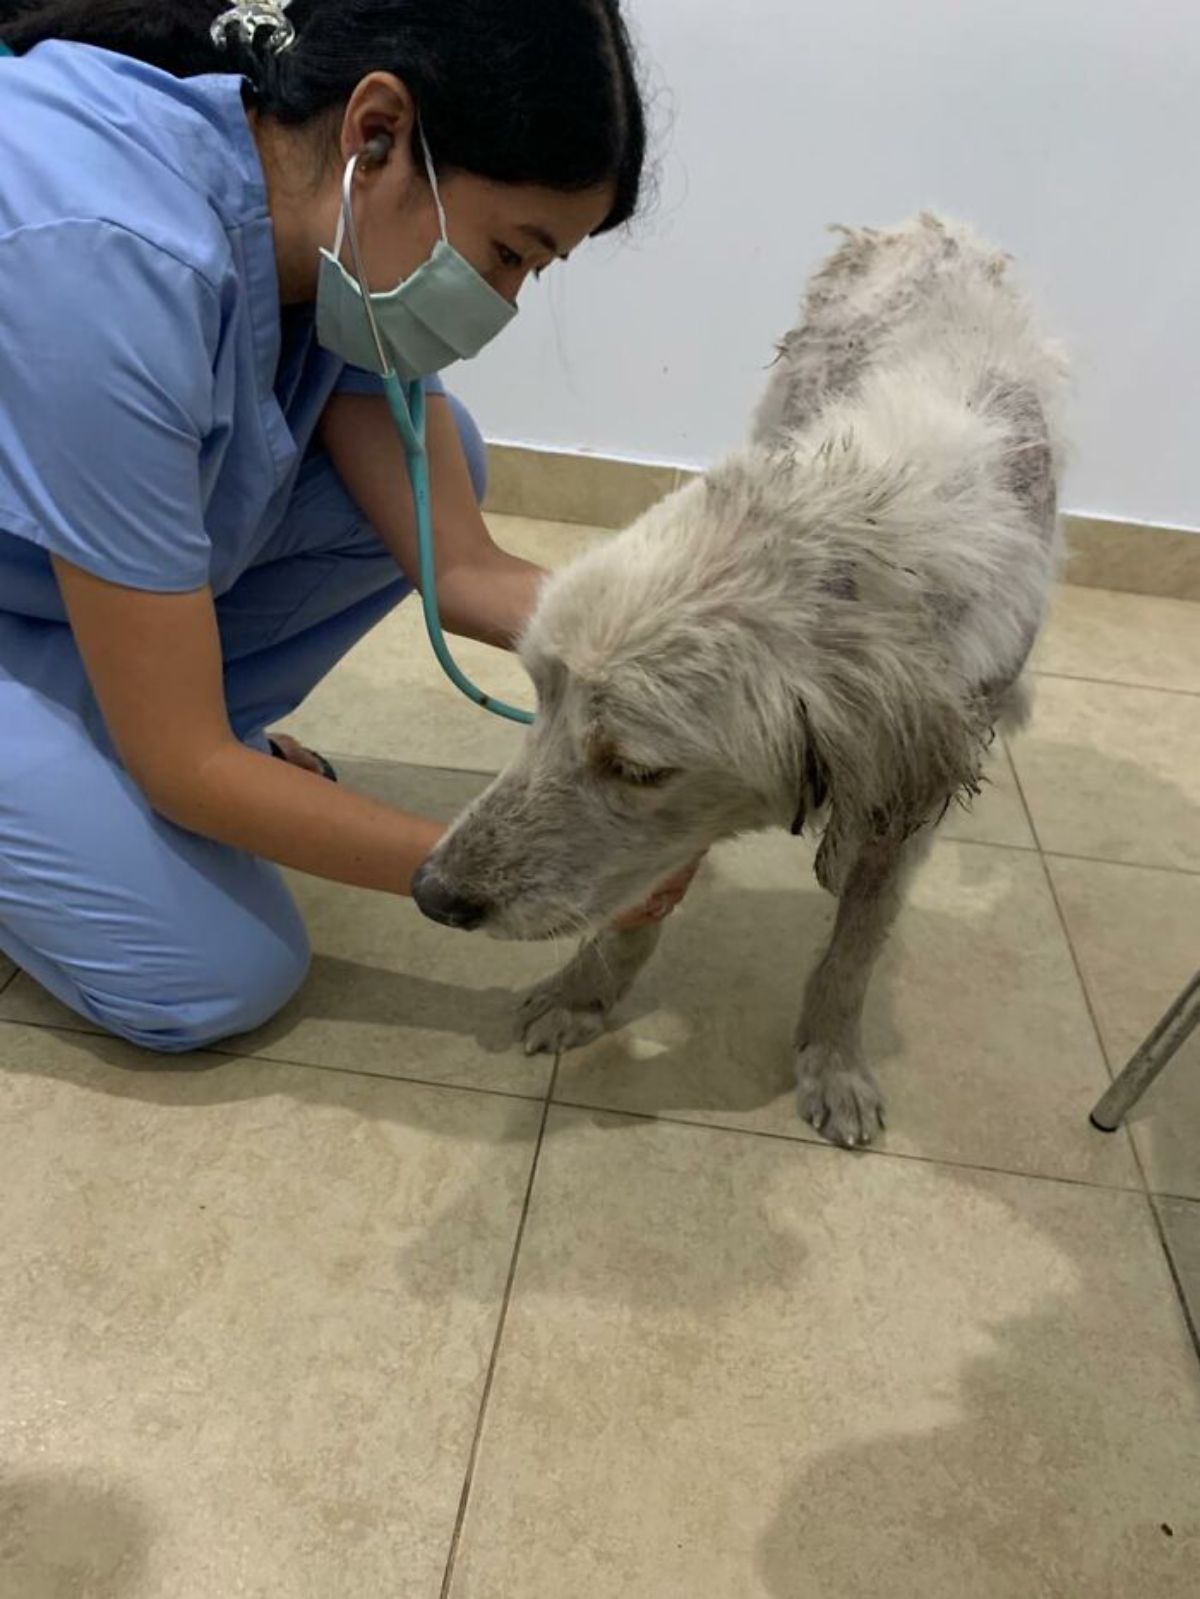 thin and mostly fur-less white dog next to a woman in blue scrubs and face mask and using a stethoscope